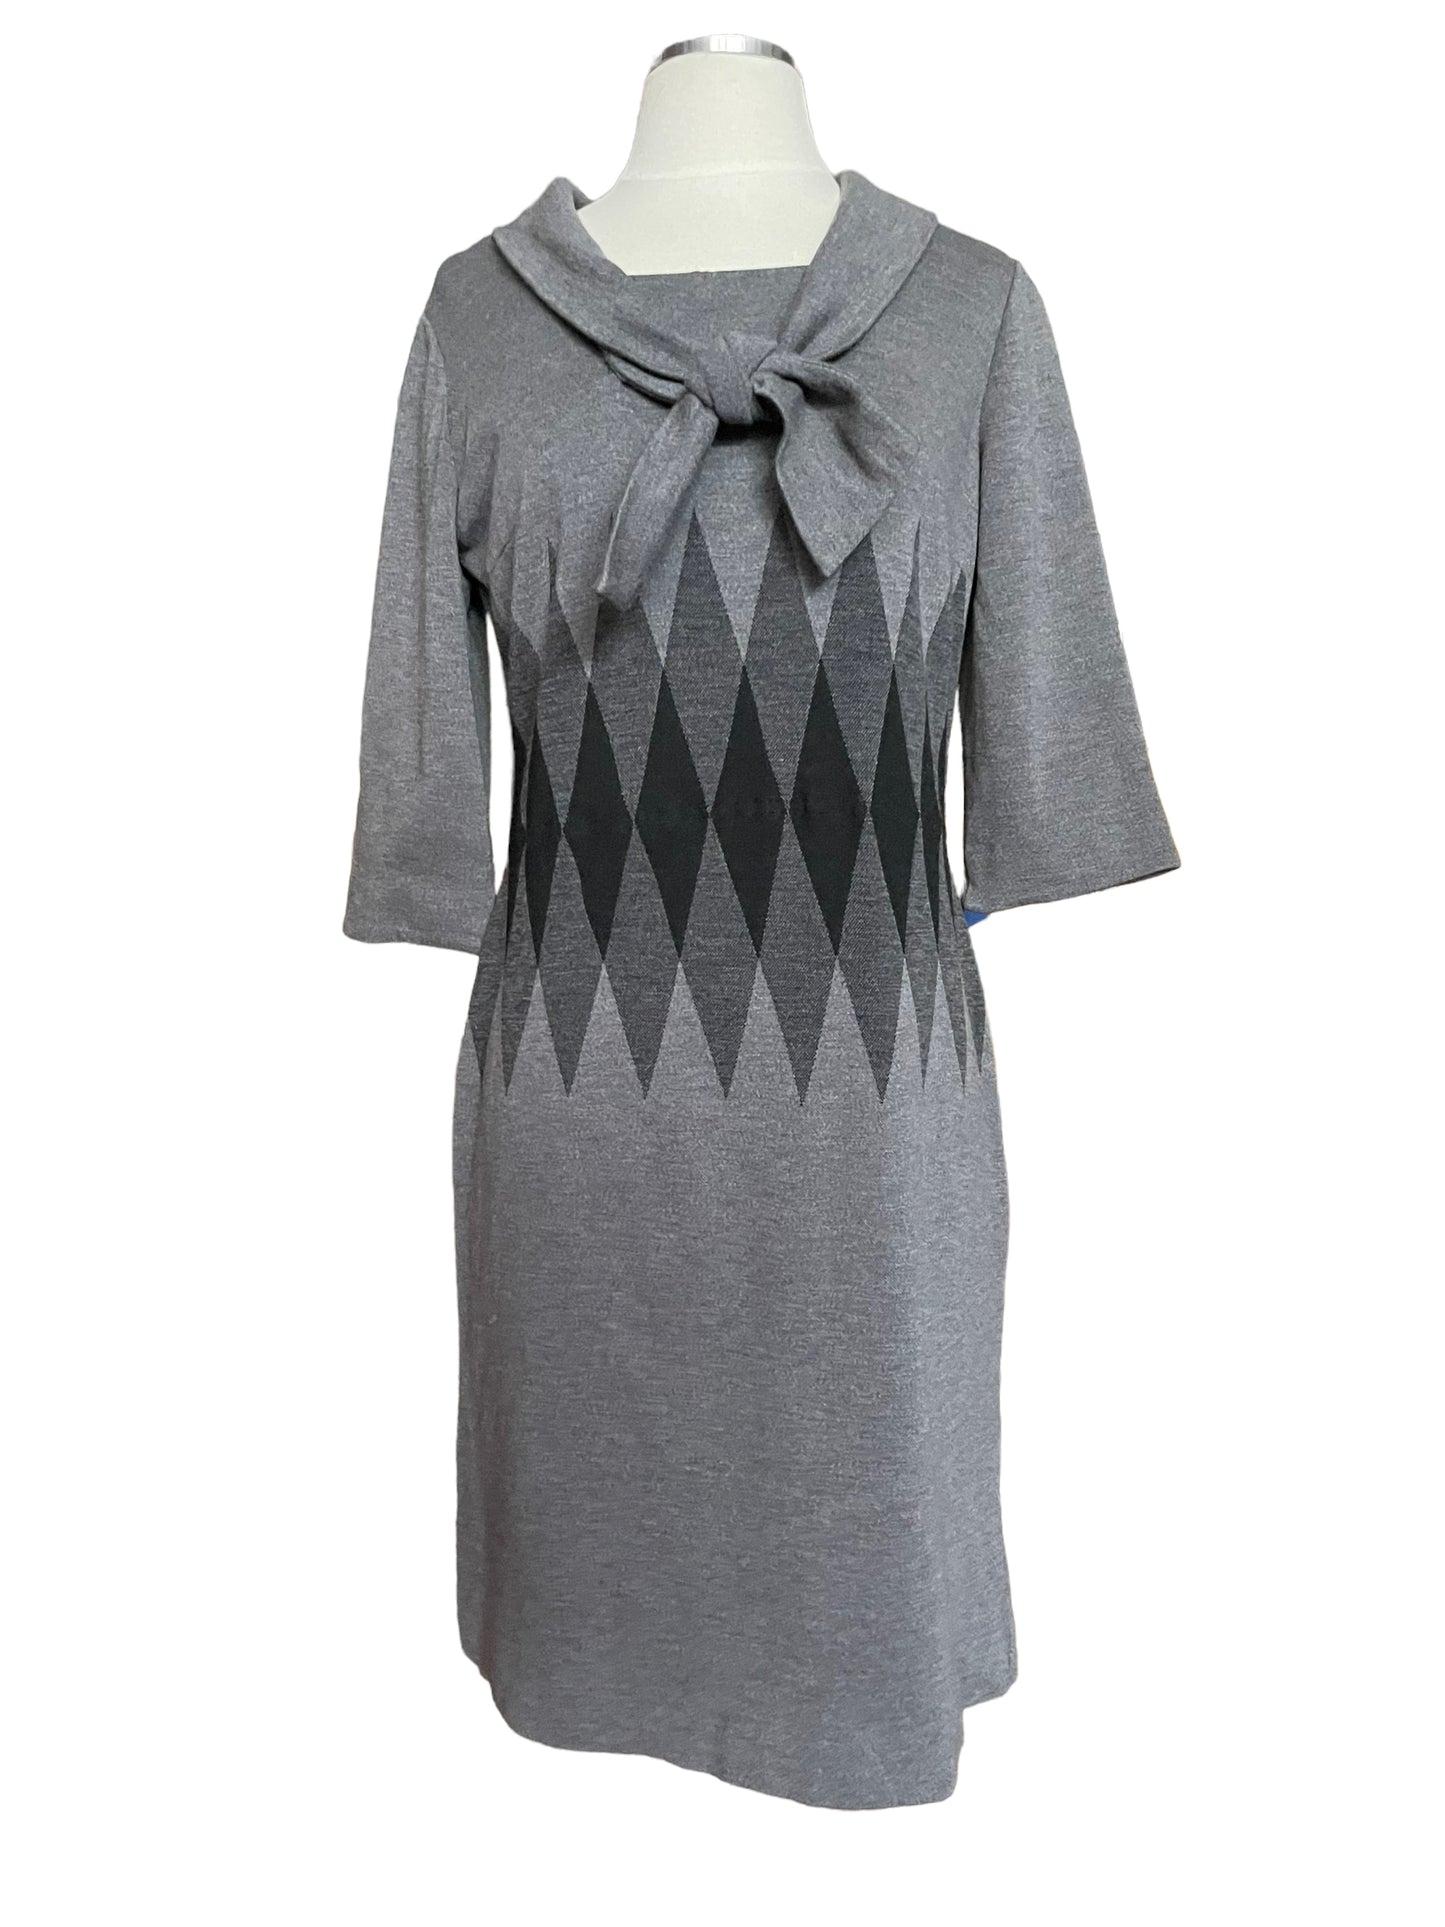 Full front view of Vintage 1950's Leslie Fay Grey Wool Dress Sz M-L